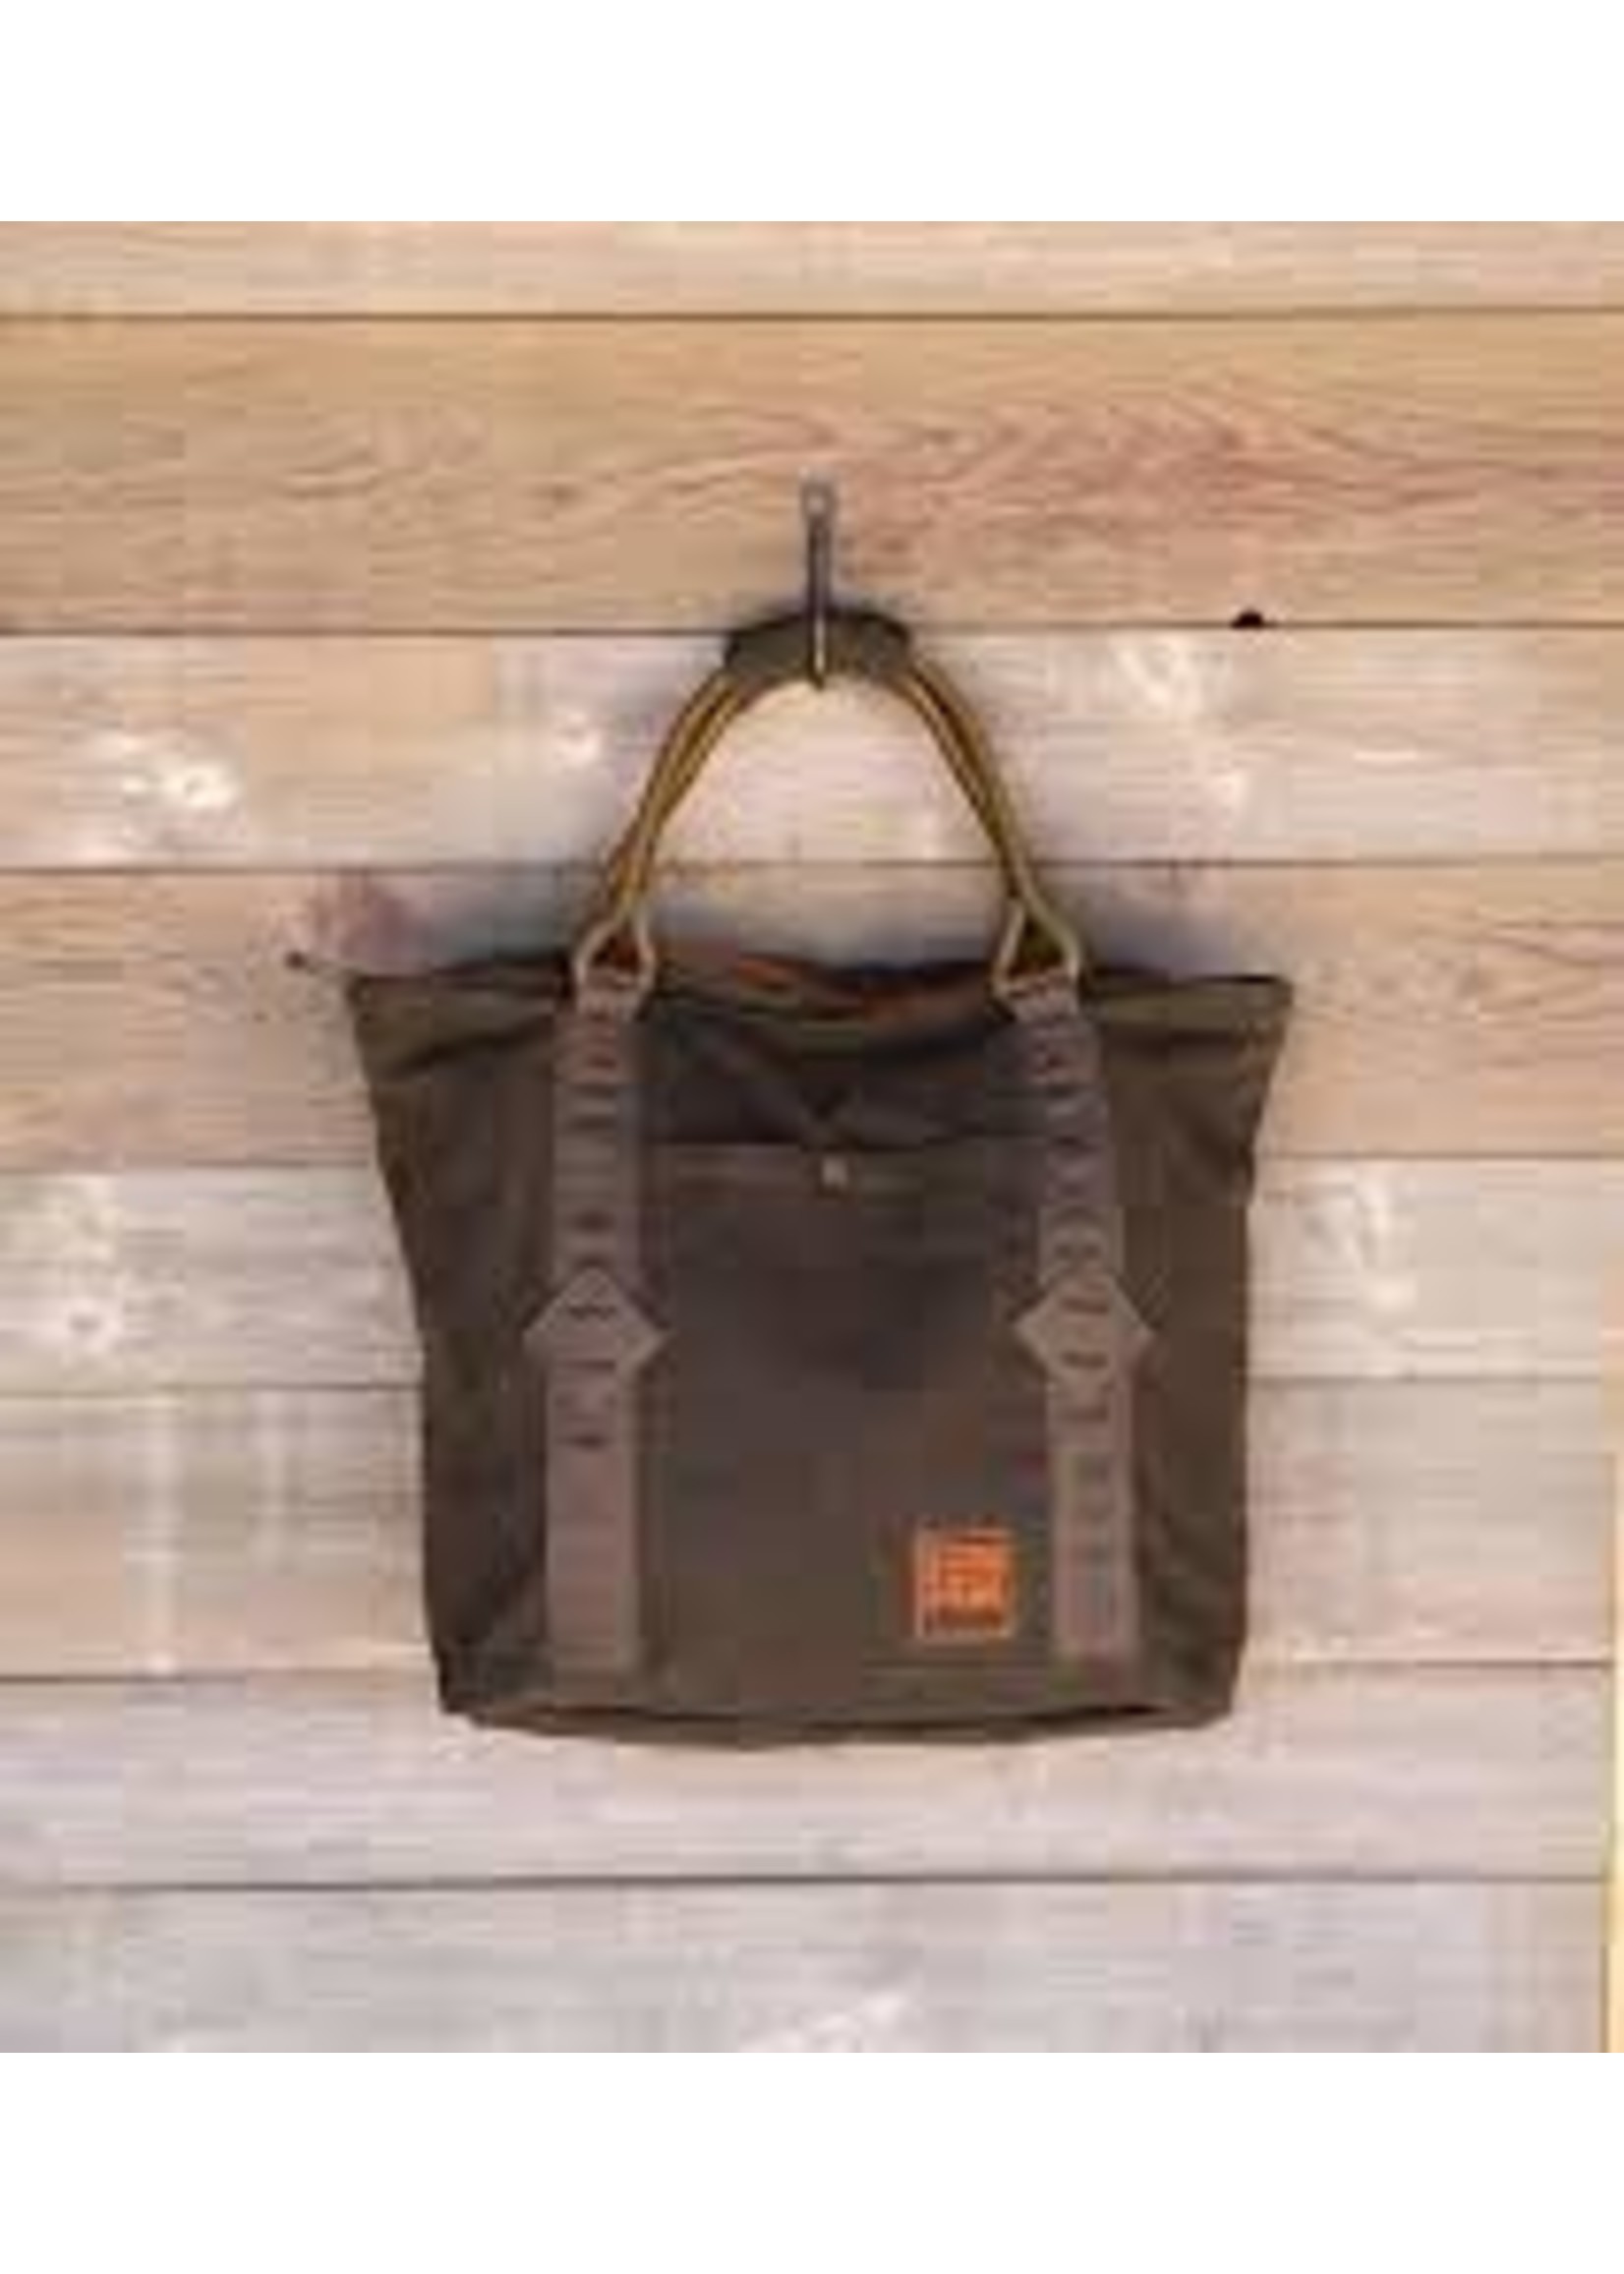 Fishpond Fishpond Horse Thief Tote Peat Moss